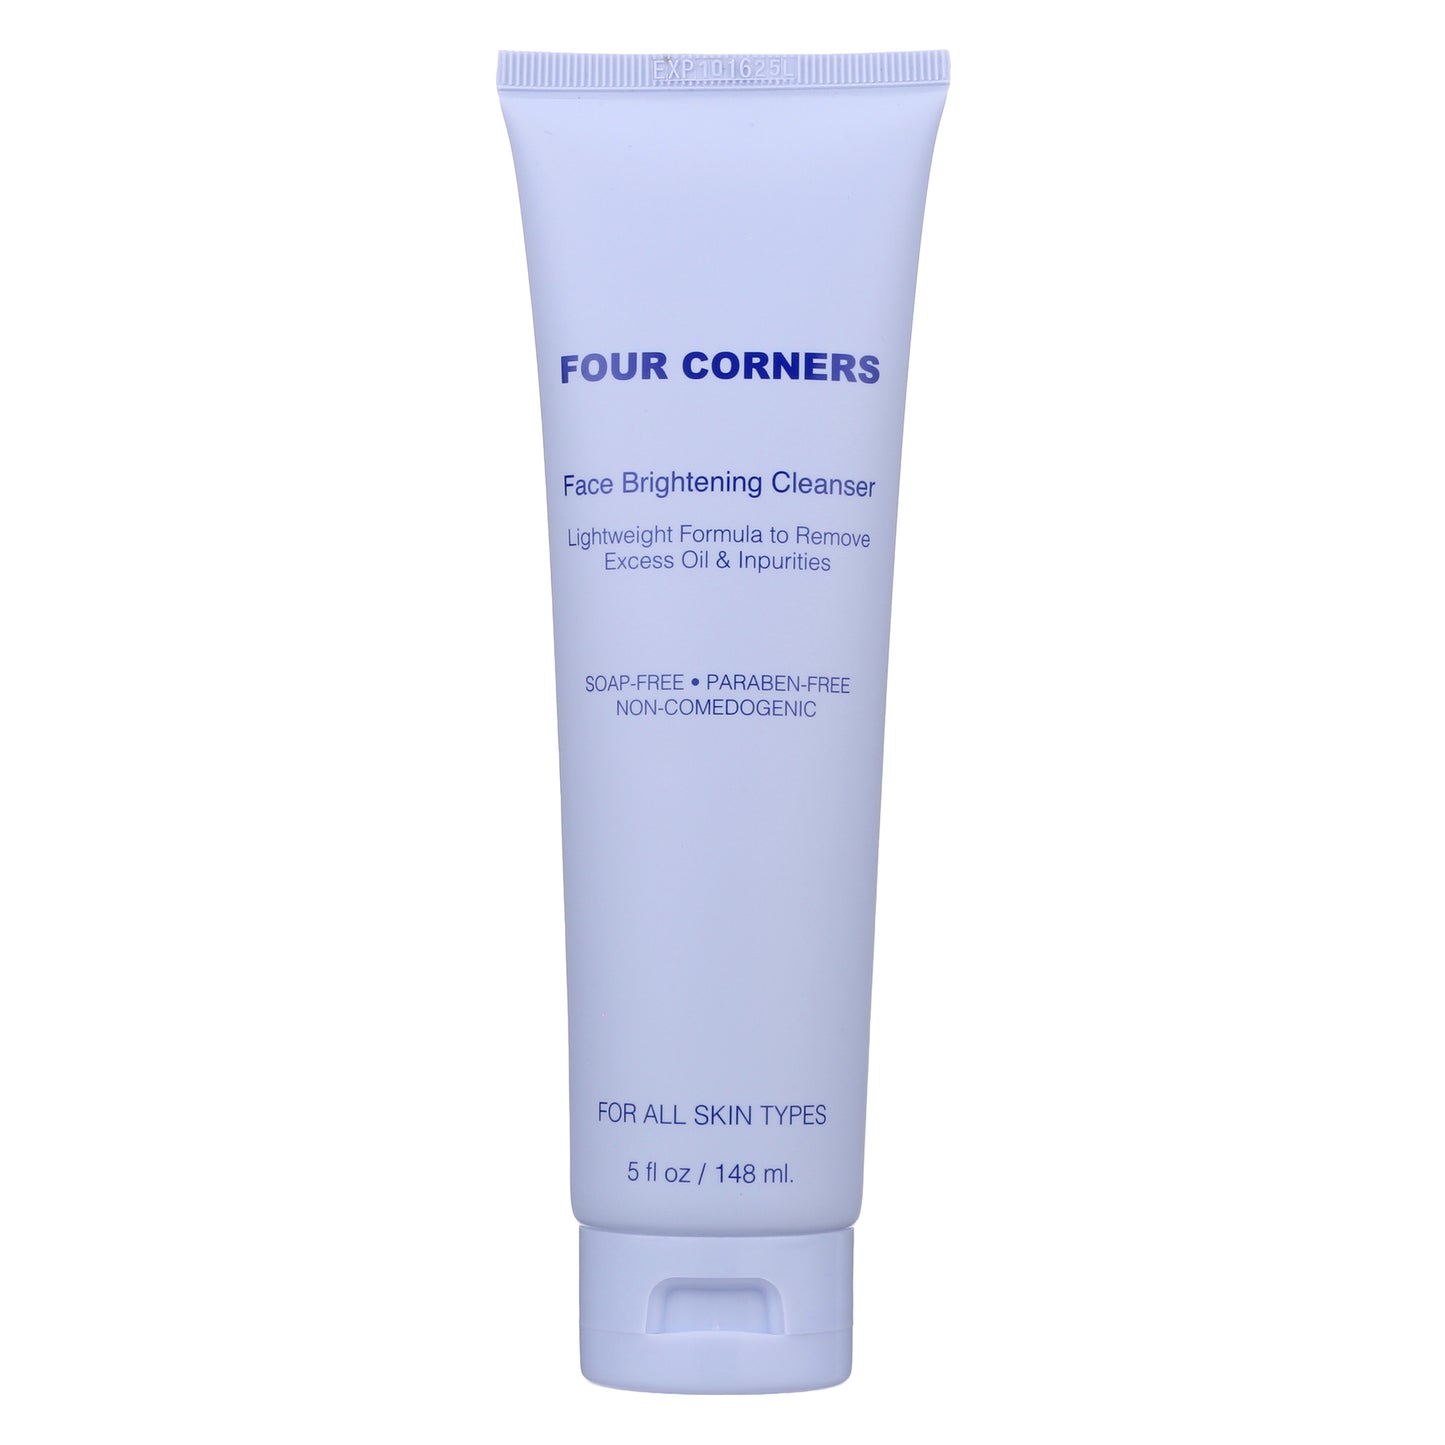 Four Corners Face Brightening Cleanser